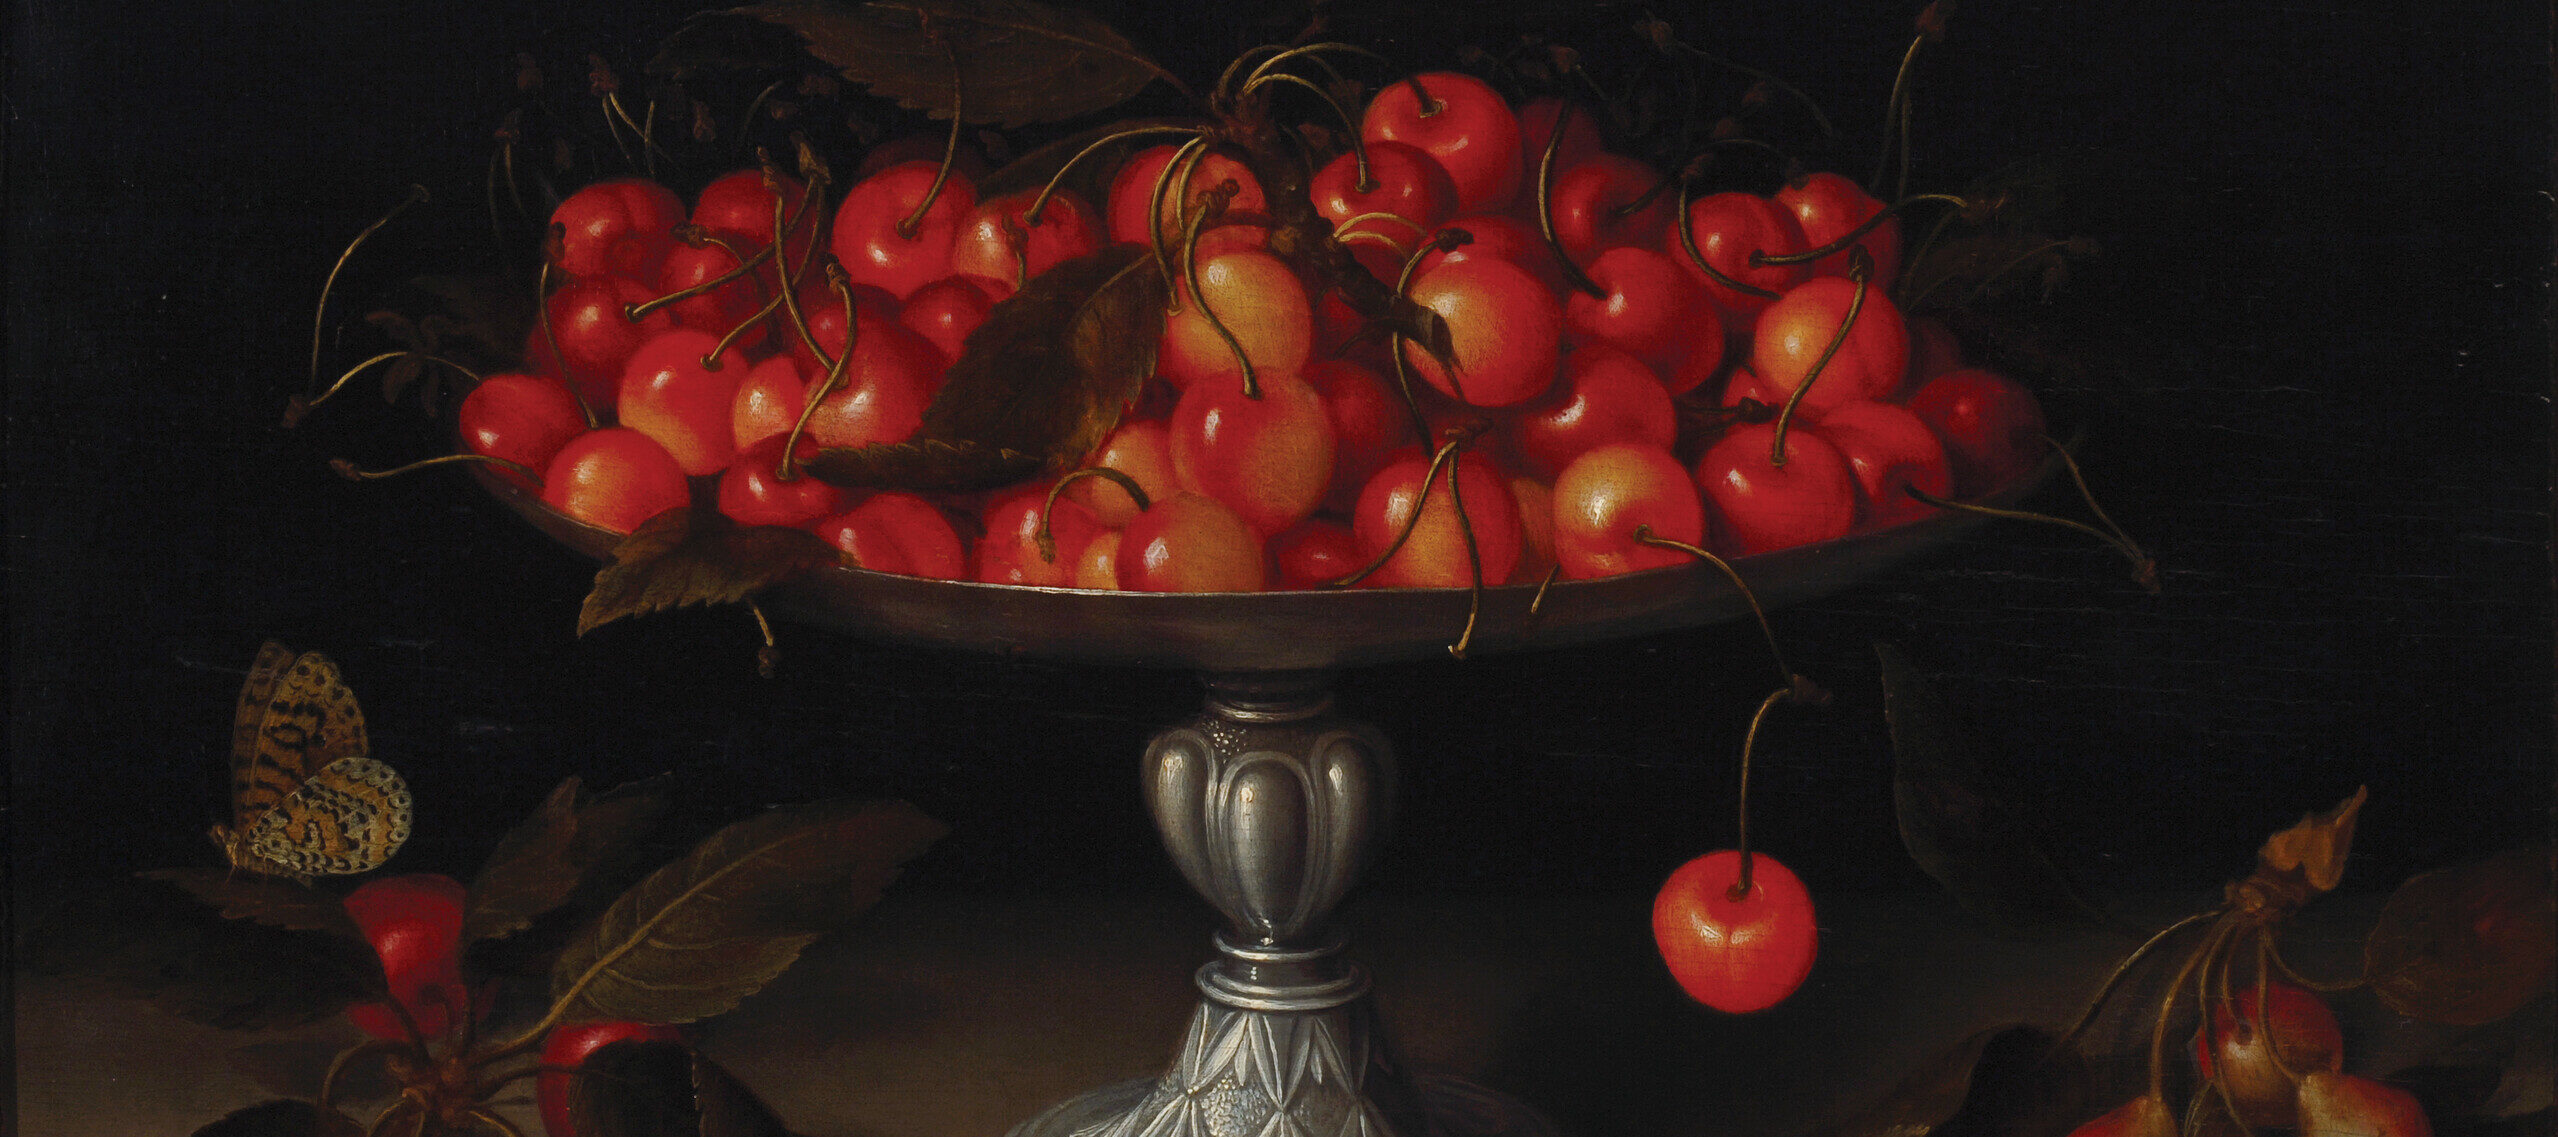 An opulent, footed silver bowl overflows with ripe cherries in front of a dramatic dark background. Additional fruits lie on the table below the bowl, and a butterfly flutters to one side.